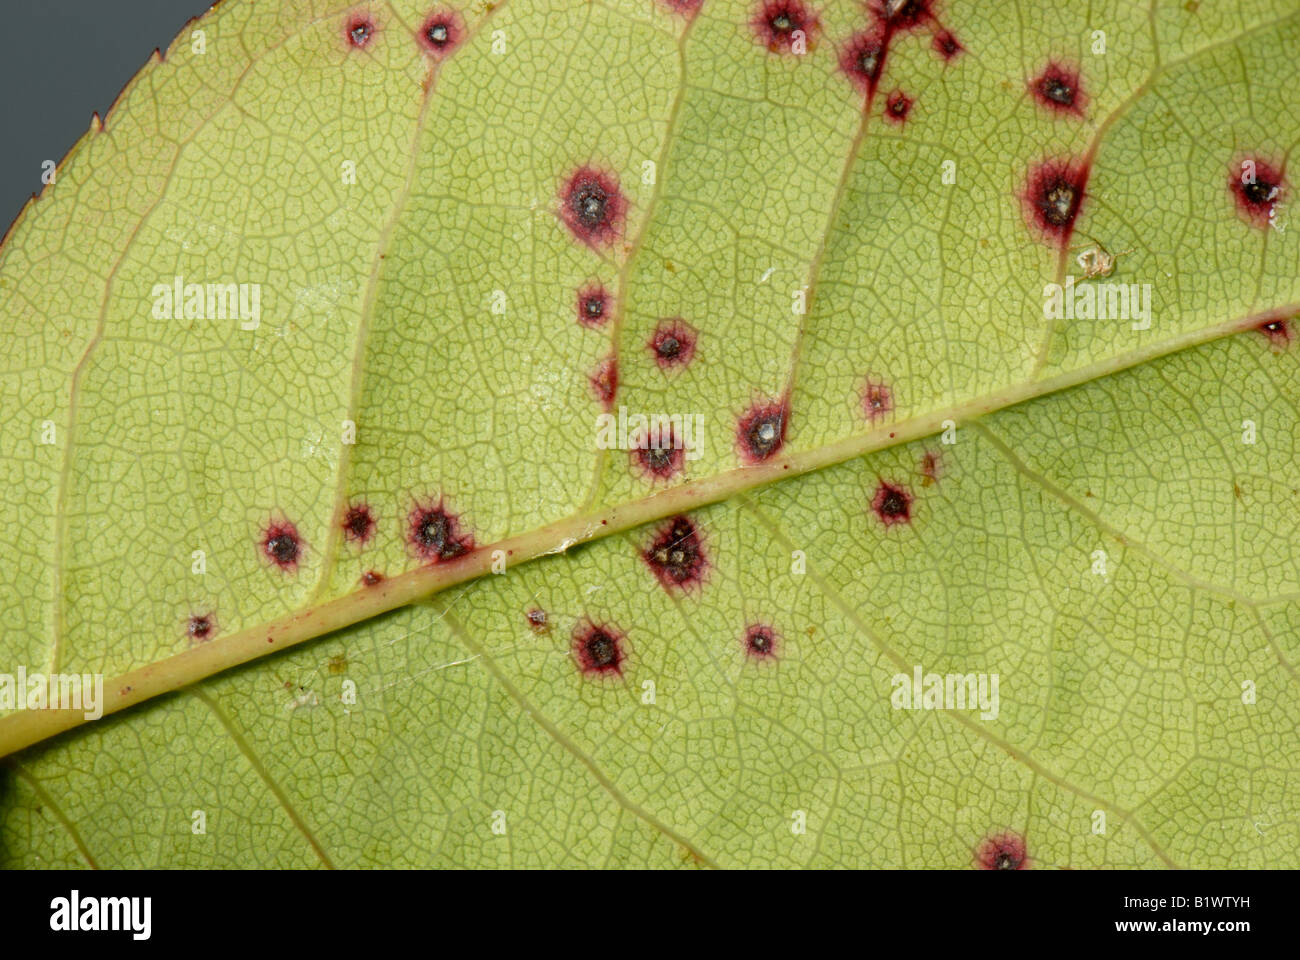 Small discreet leaf spots caused by black spot Diplocarpon rosae on a tree rose leaf Stock Photo